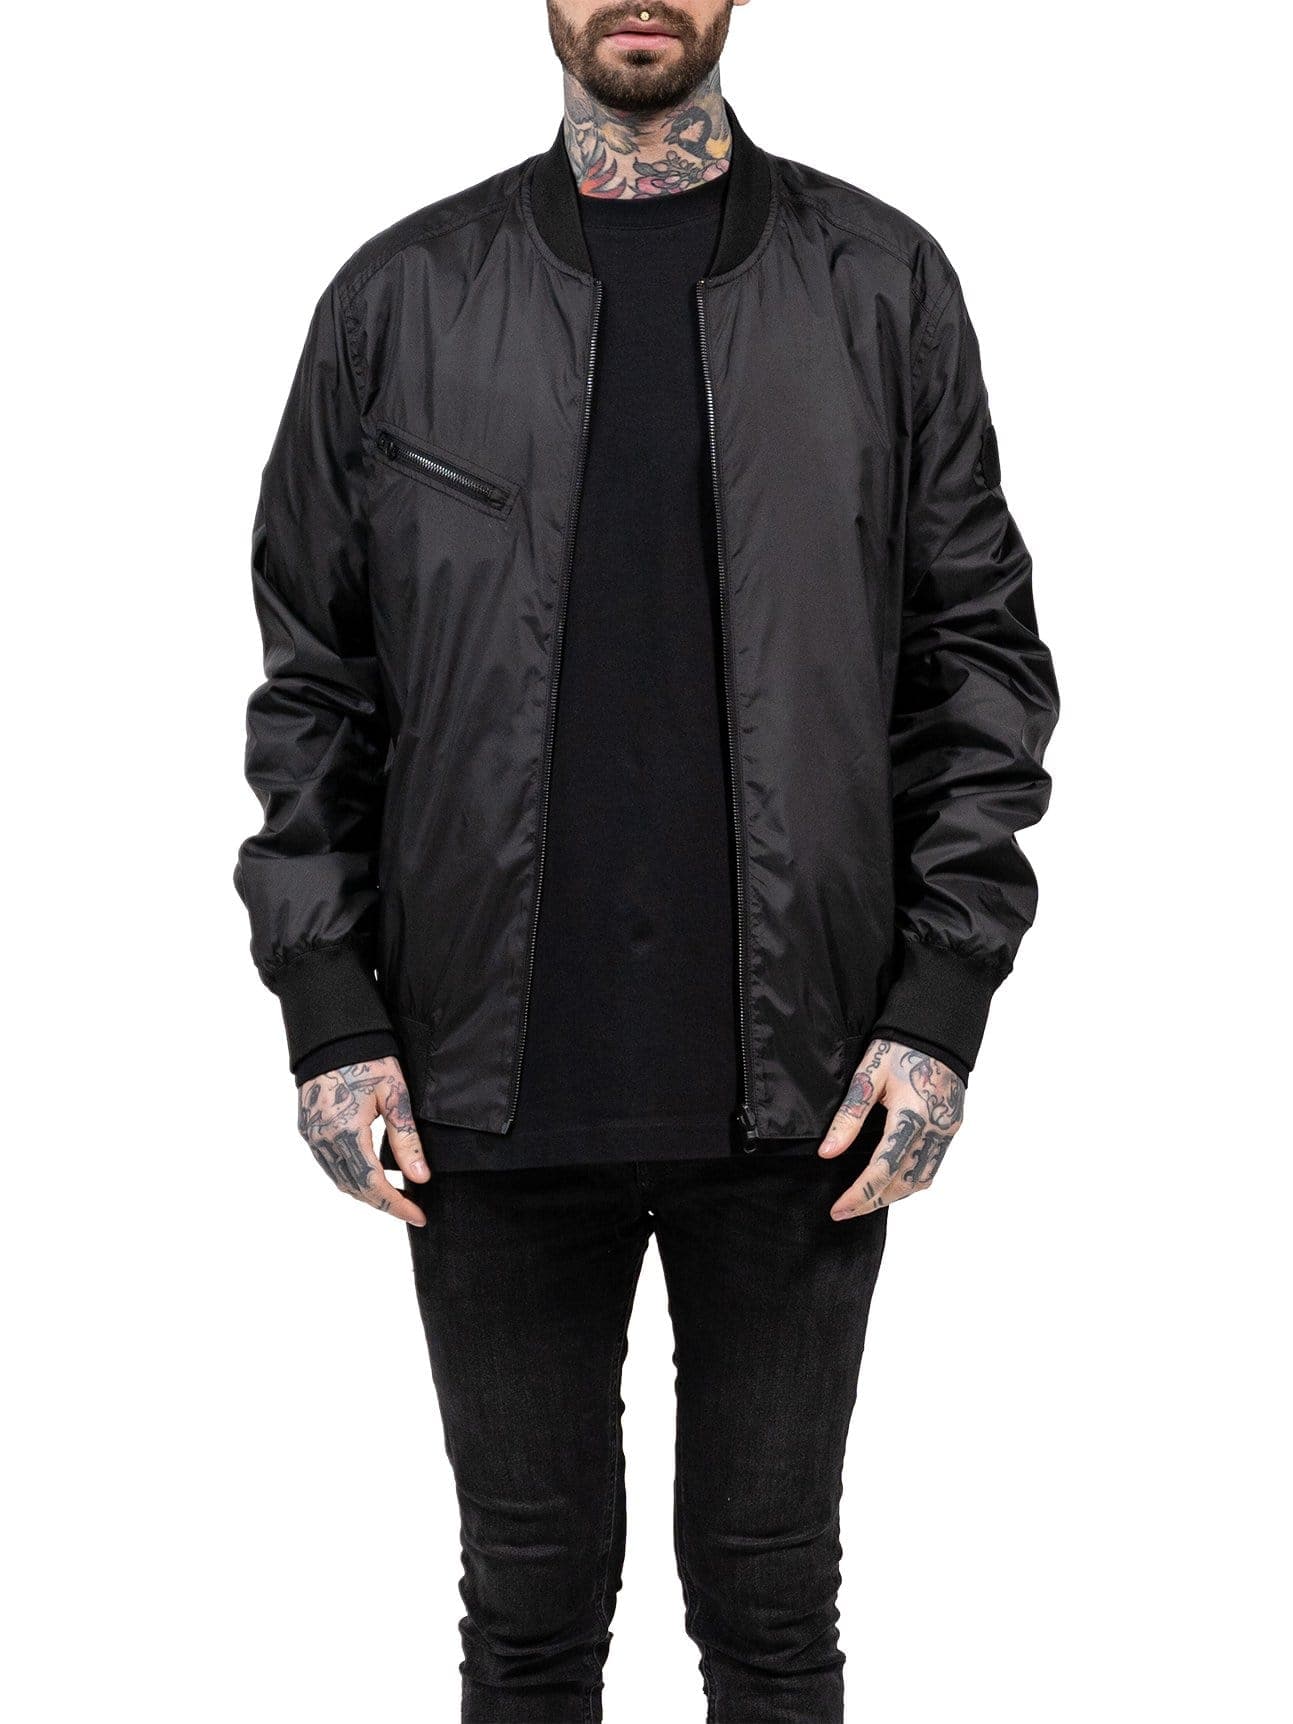 A reversible bomber jacket in black and reflective. 2 jackets in 1. 